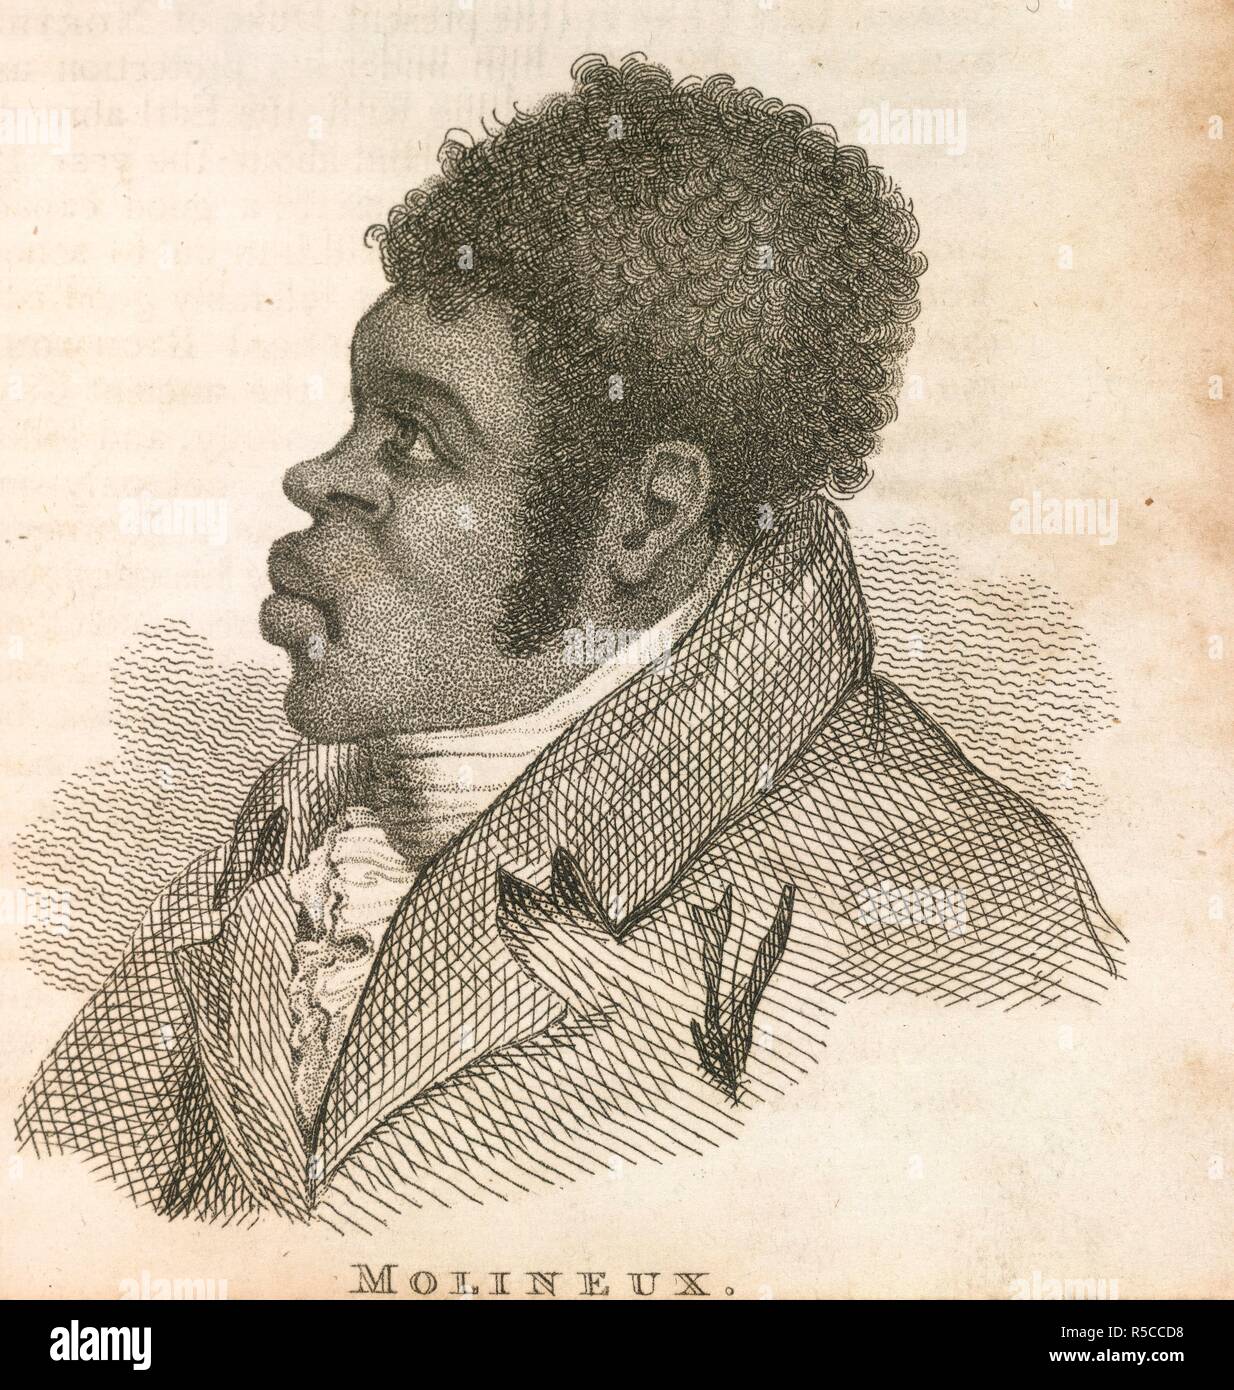 Tom Molineux. Boxiana; or Sketches of ancient and modern pugilis. G. Smeeton: London, 1812. Tom Molineux (1784-1818). Pugilist/Boxer. Portrait. A freed slave, he arrived in England in 1809 and began to box professionally, trained by Bill Richmond. His most famous matches were against the British champion Tom Cribb in 1810 and 1811. He lost on both occasions but became a national celebrity.  Image taken from Boxiana; or Sketches of ancient and modern pugilism; from the days of the reowned Broughton and Slack, to the heroes of the present milling Ã¦ra! By One of the Fancy [i.e. Pierce Egan]. [Wi Stock Photo